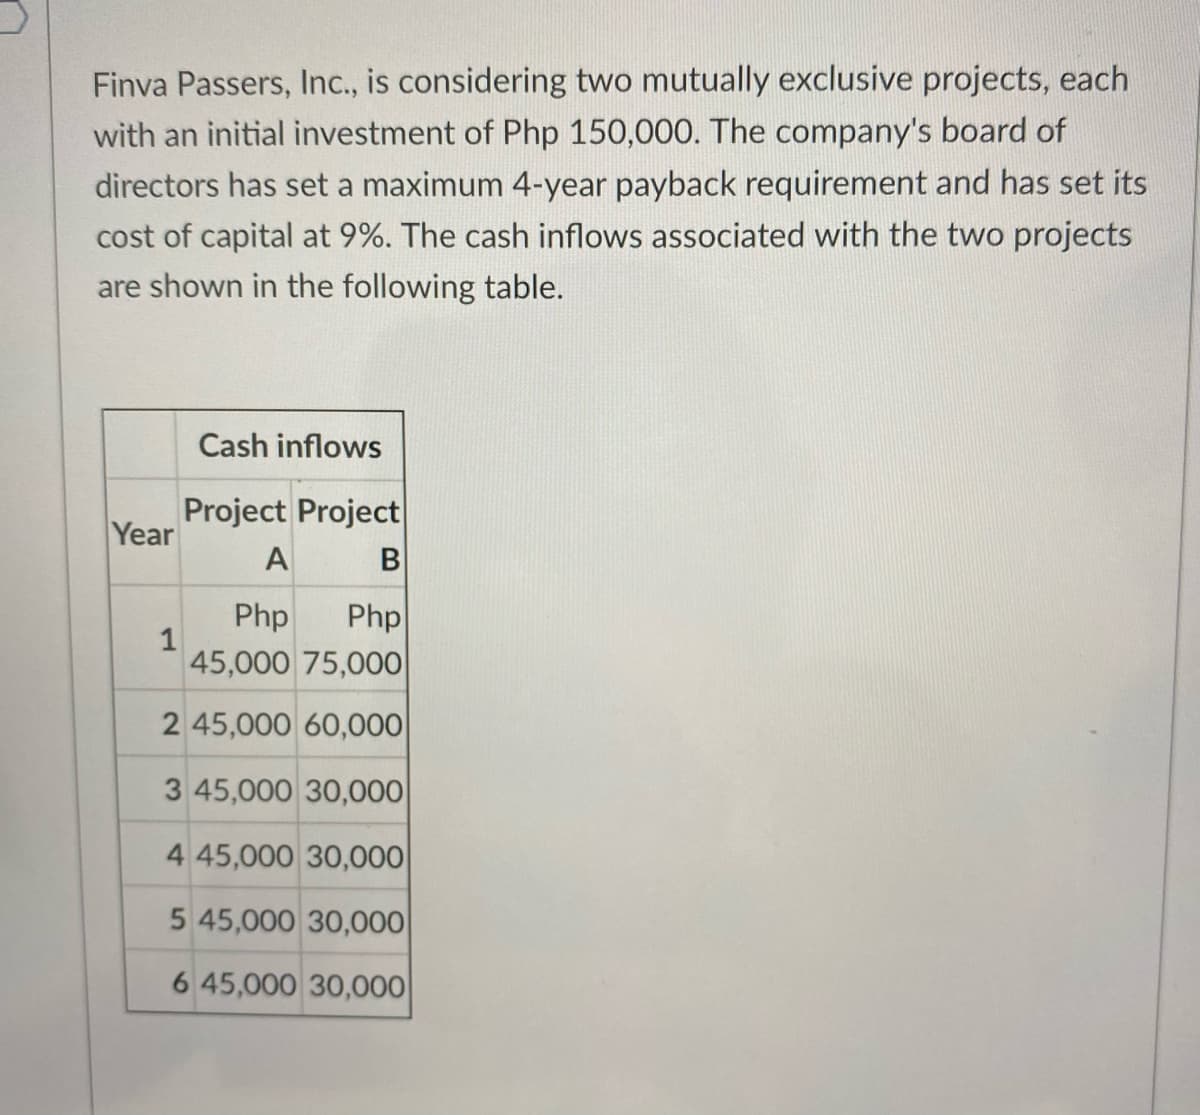 Finva Passers, Inc., is considering two mutually exclusive projects, each
with an initial investment of Php 150,000. The company's board of
directors has set a maximum 4-year payback requirement and has set its
cost of capital at 9%. The cash inflows associated with the two projects
are shown in the following table.
Cash inflows
Project Project
Year
A
Php
Php
1
45,000 75,000
2 45,000 60,000
3 45,000 30,000
4 45,000 30,000
5 45,000 30,00|
6 45,000 30,000
